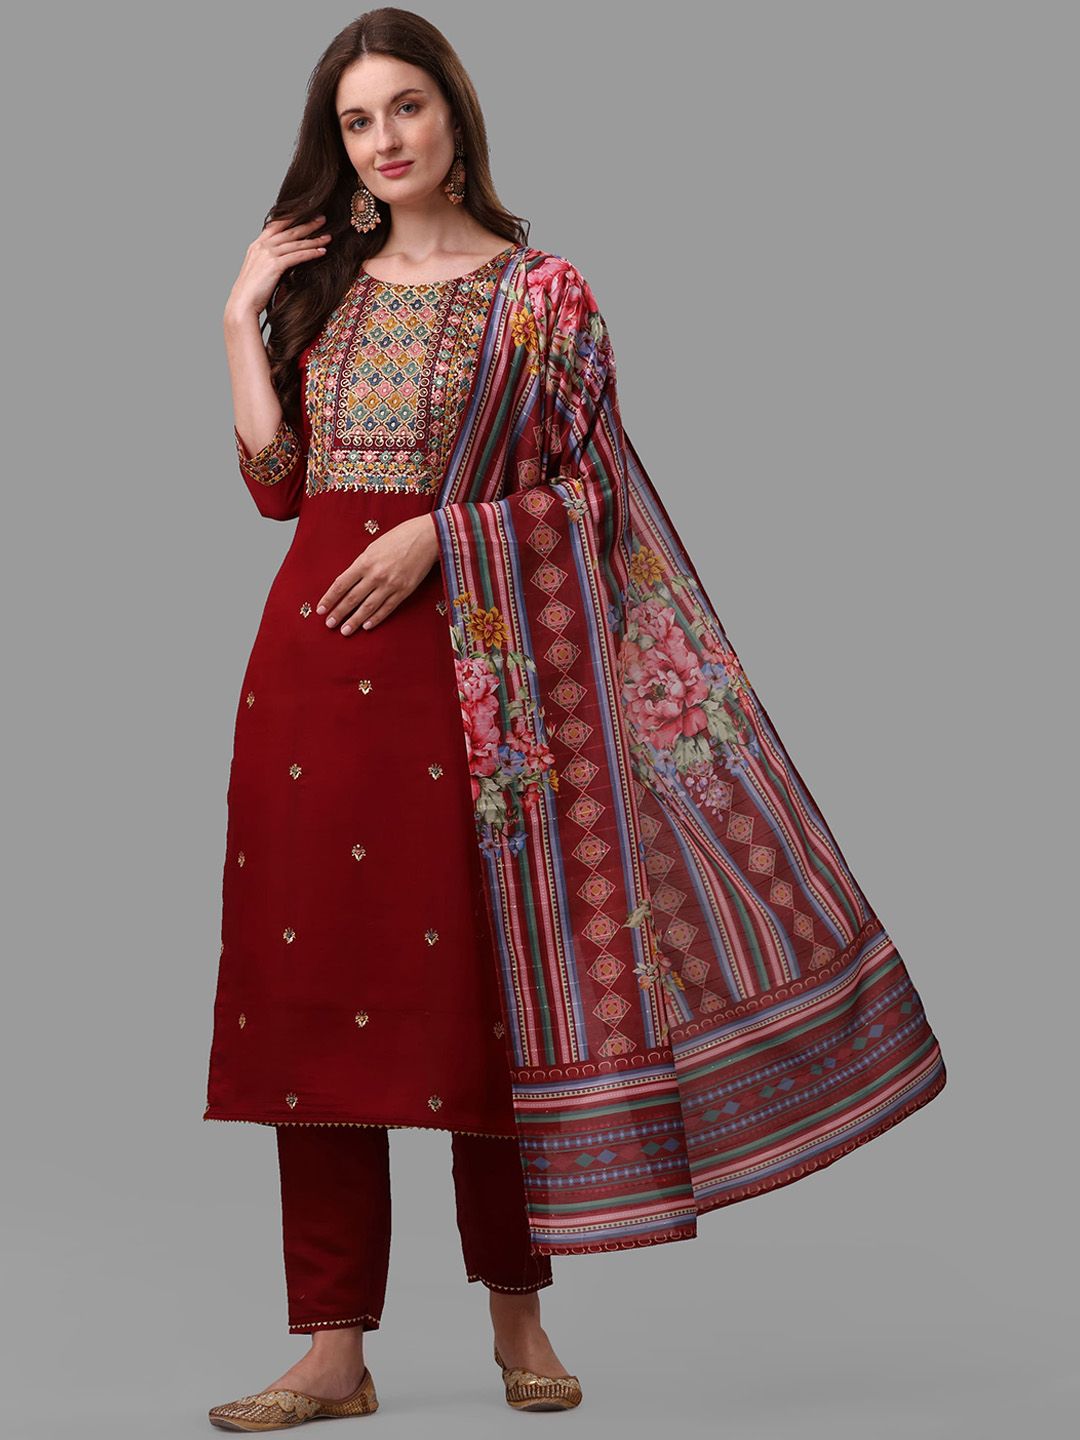 Berrylicious Women Maroon Floral Embroidered Chanderi Cotton Kurta with Trousers & With Dupatta Price in India